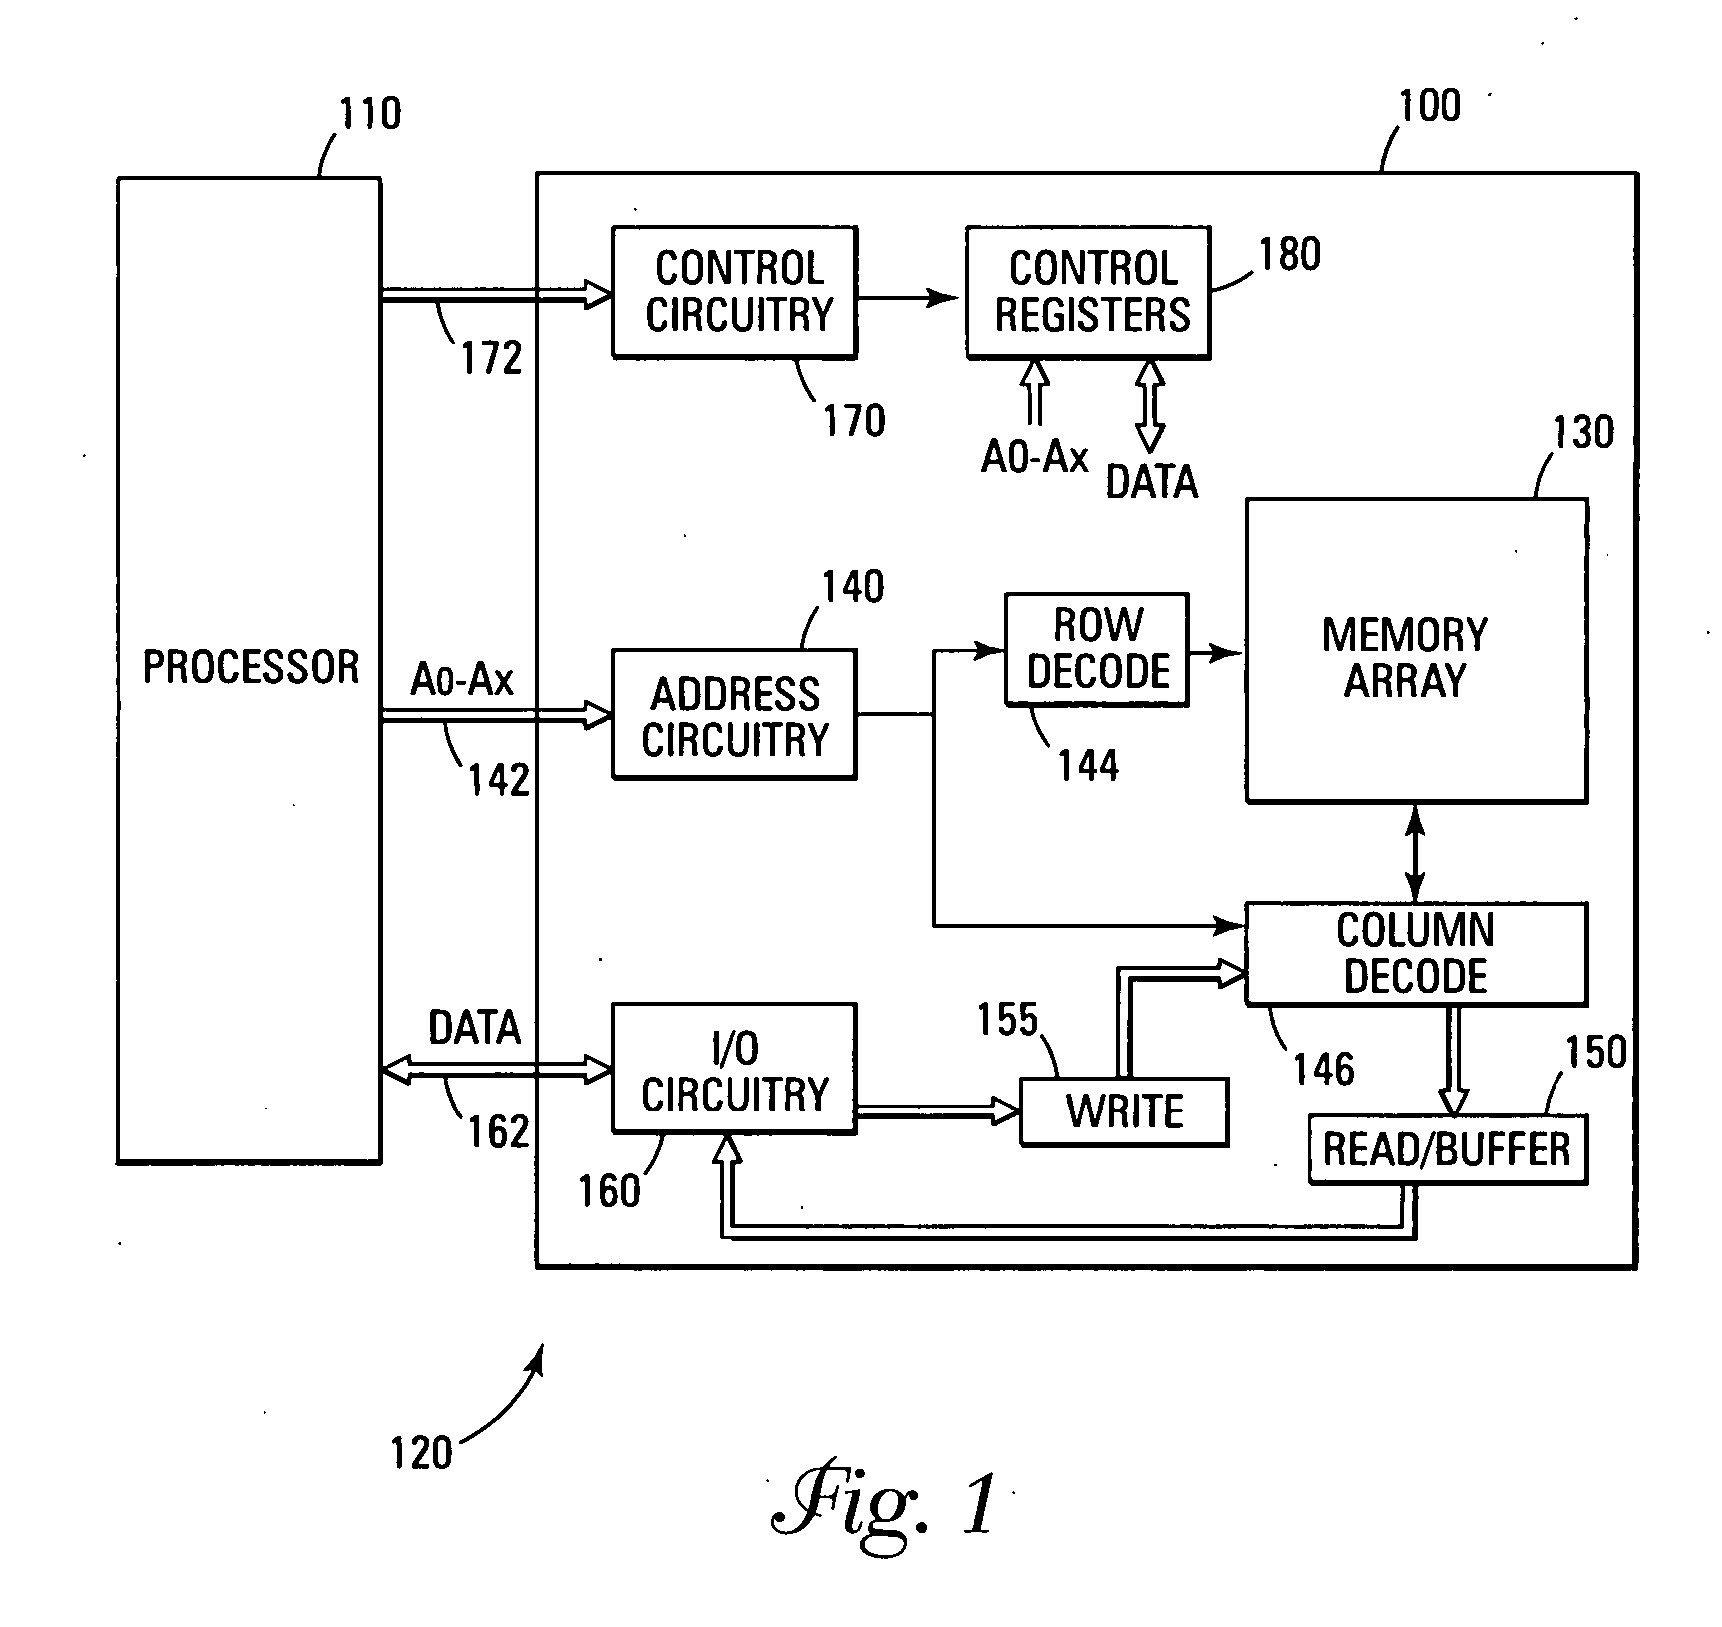 Error detection and correction scheme for a memory device